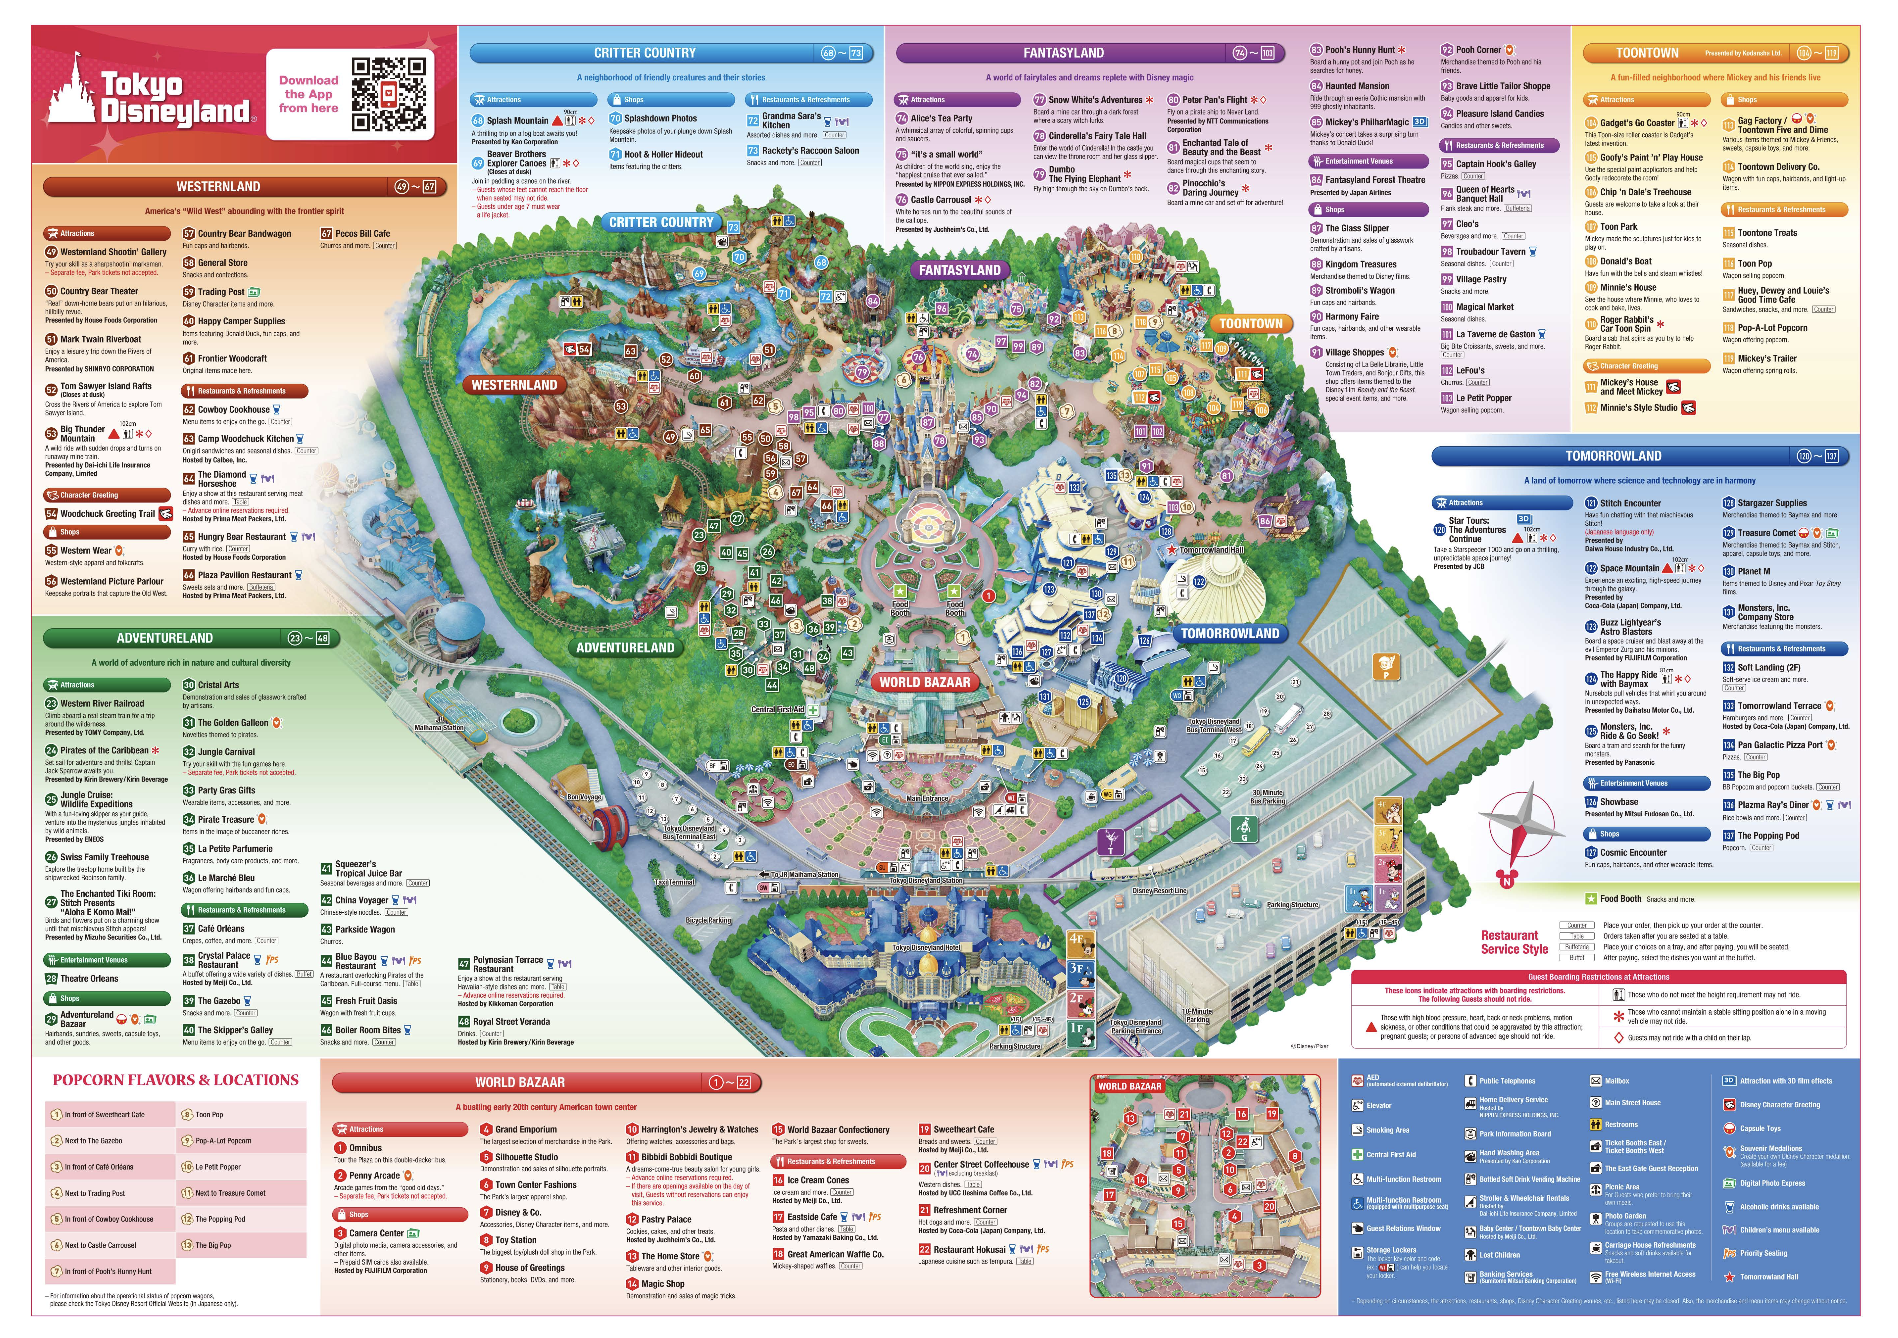 An illustrated map of Tokyo Disneyland showing various attractions, entertainment areas, and amenities. Key areas include Adventureland, Westernland, Fantasyland, and Tomorrowland